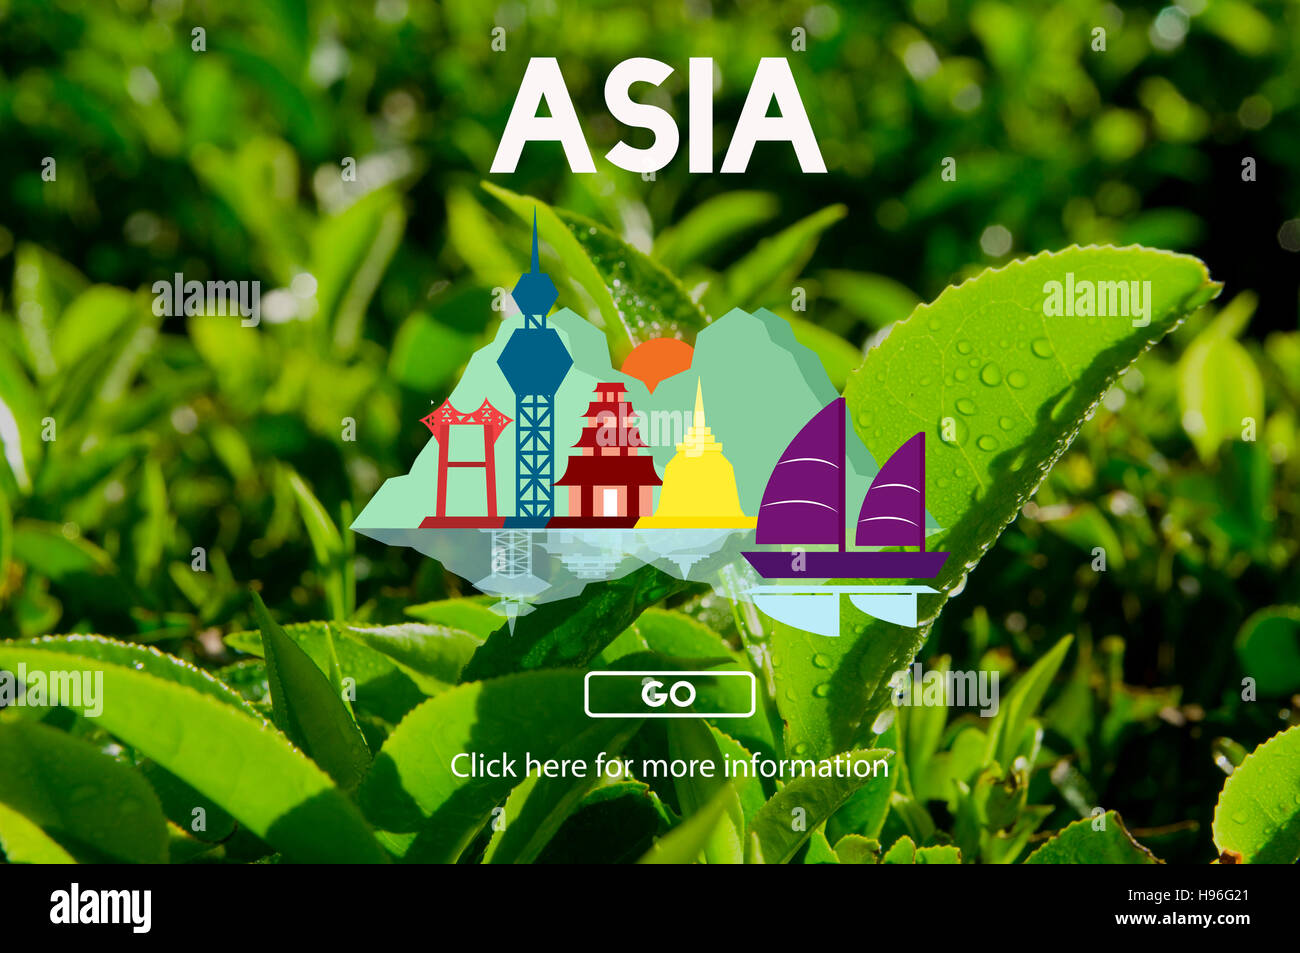 Asia East Continent Informative Culture Graphic Concept Stock Photo